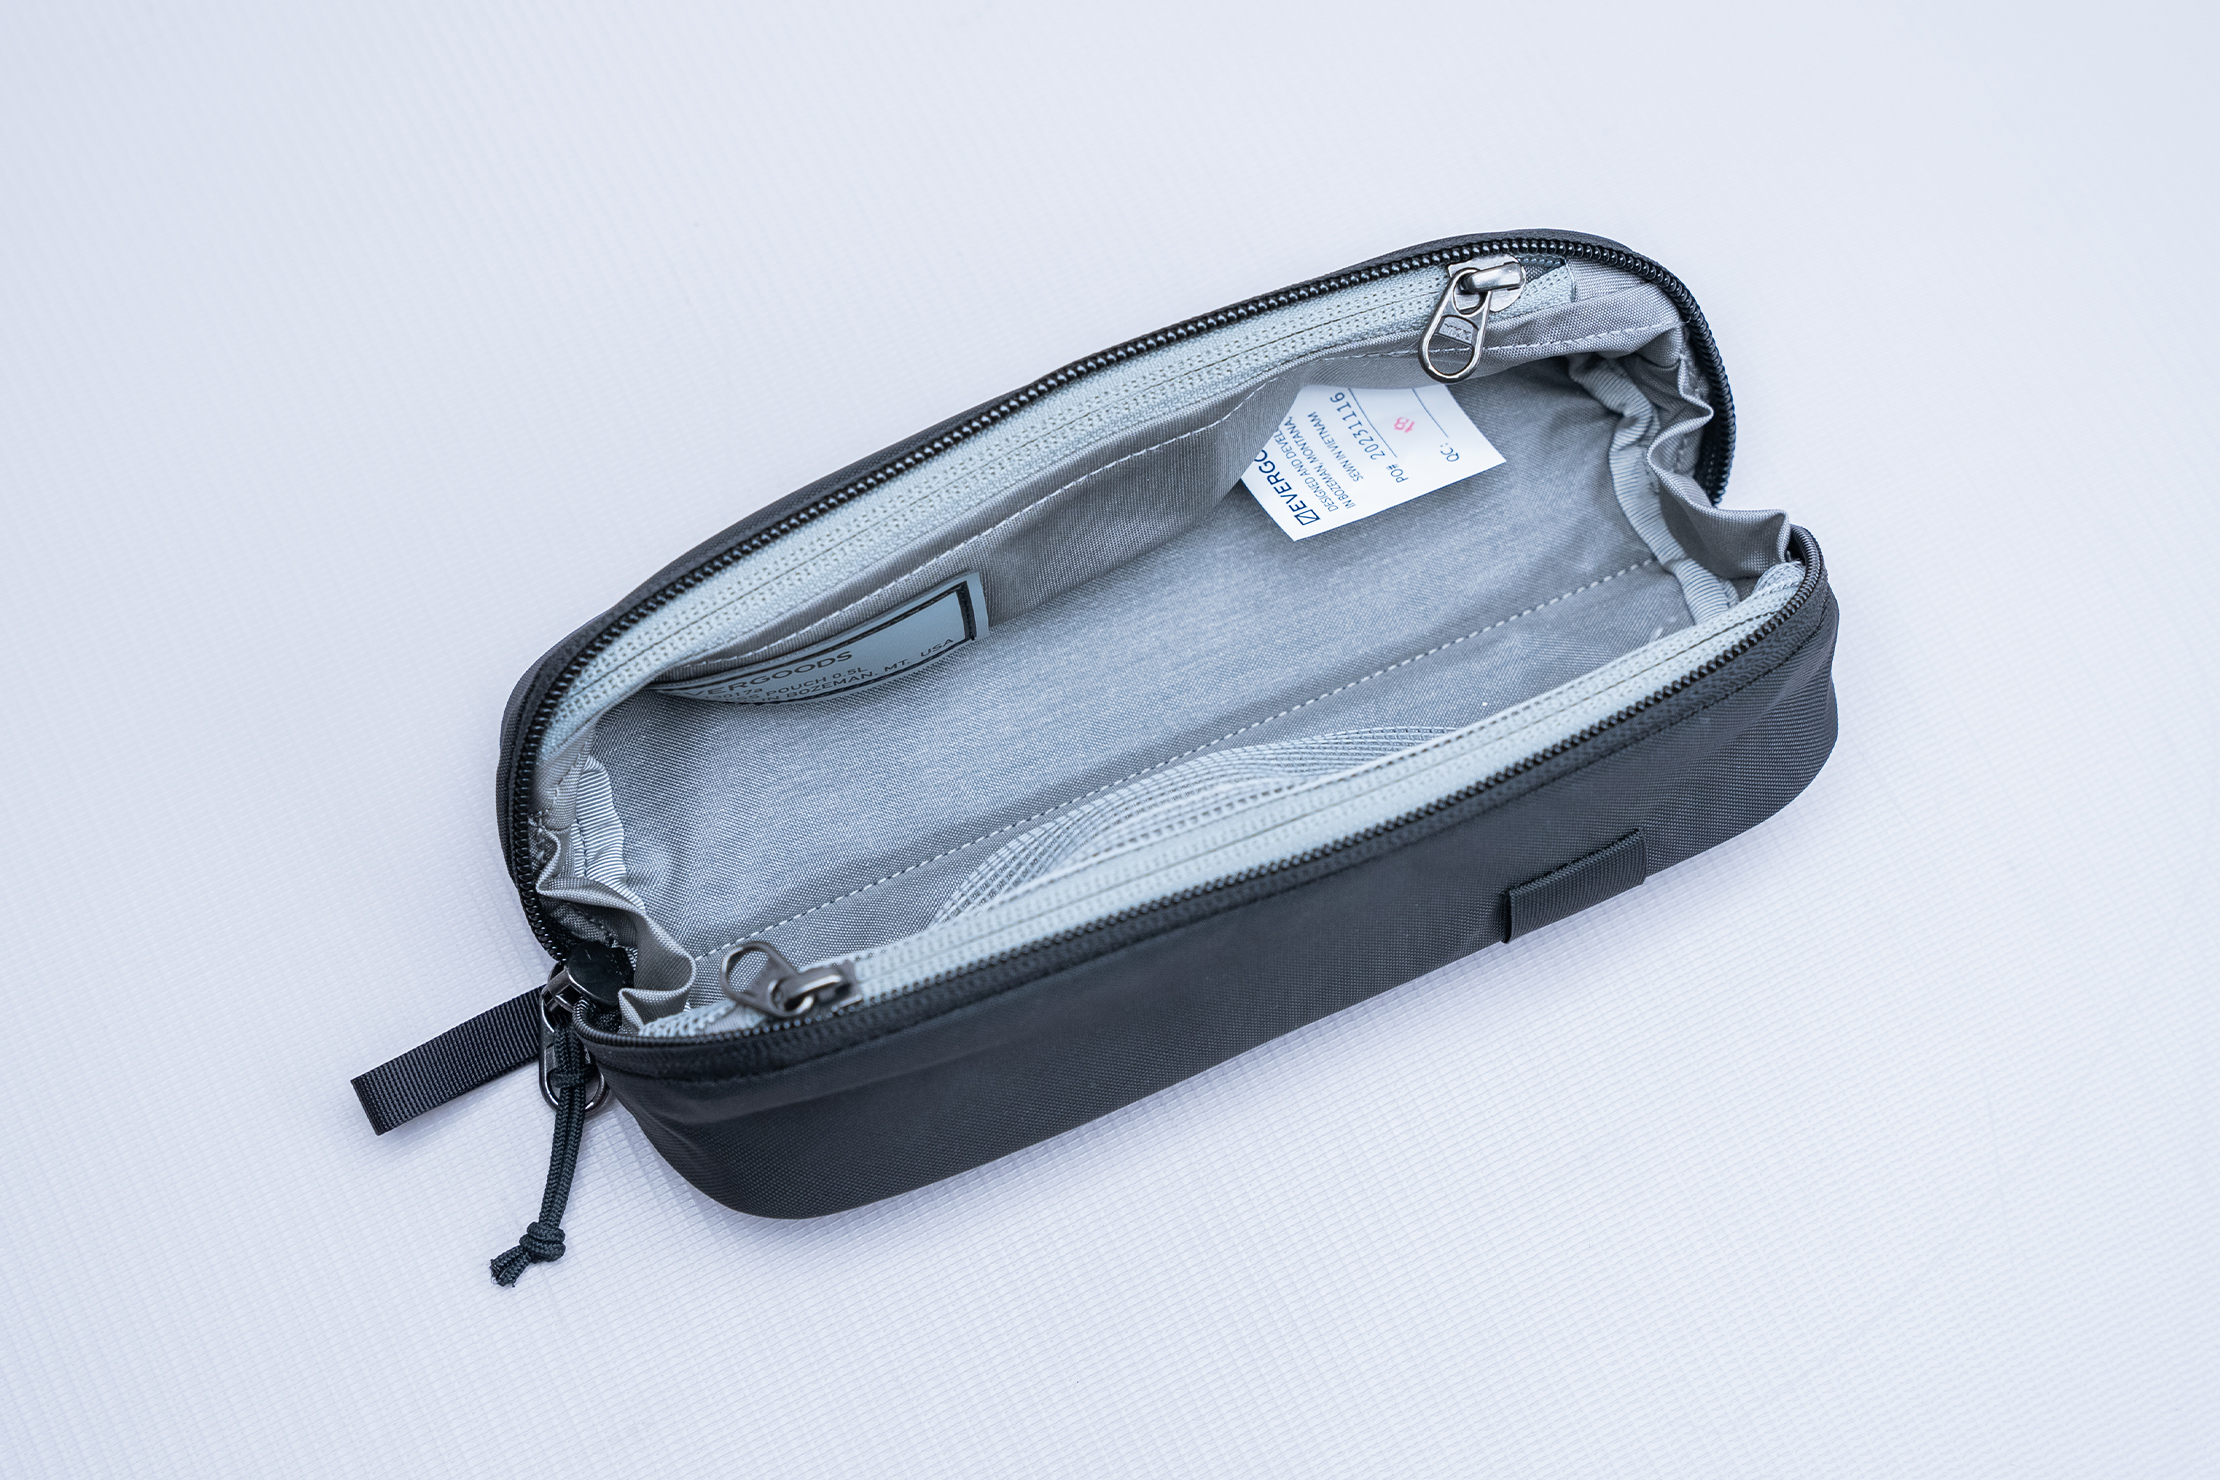 EVERGOODS Civic Access Pouch 0.5L Empty